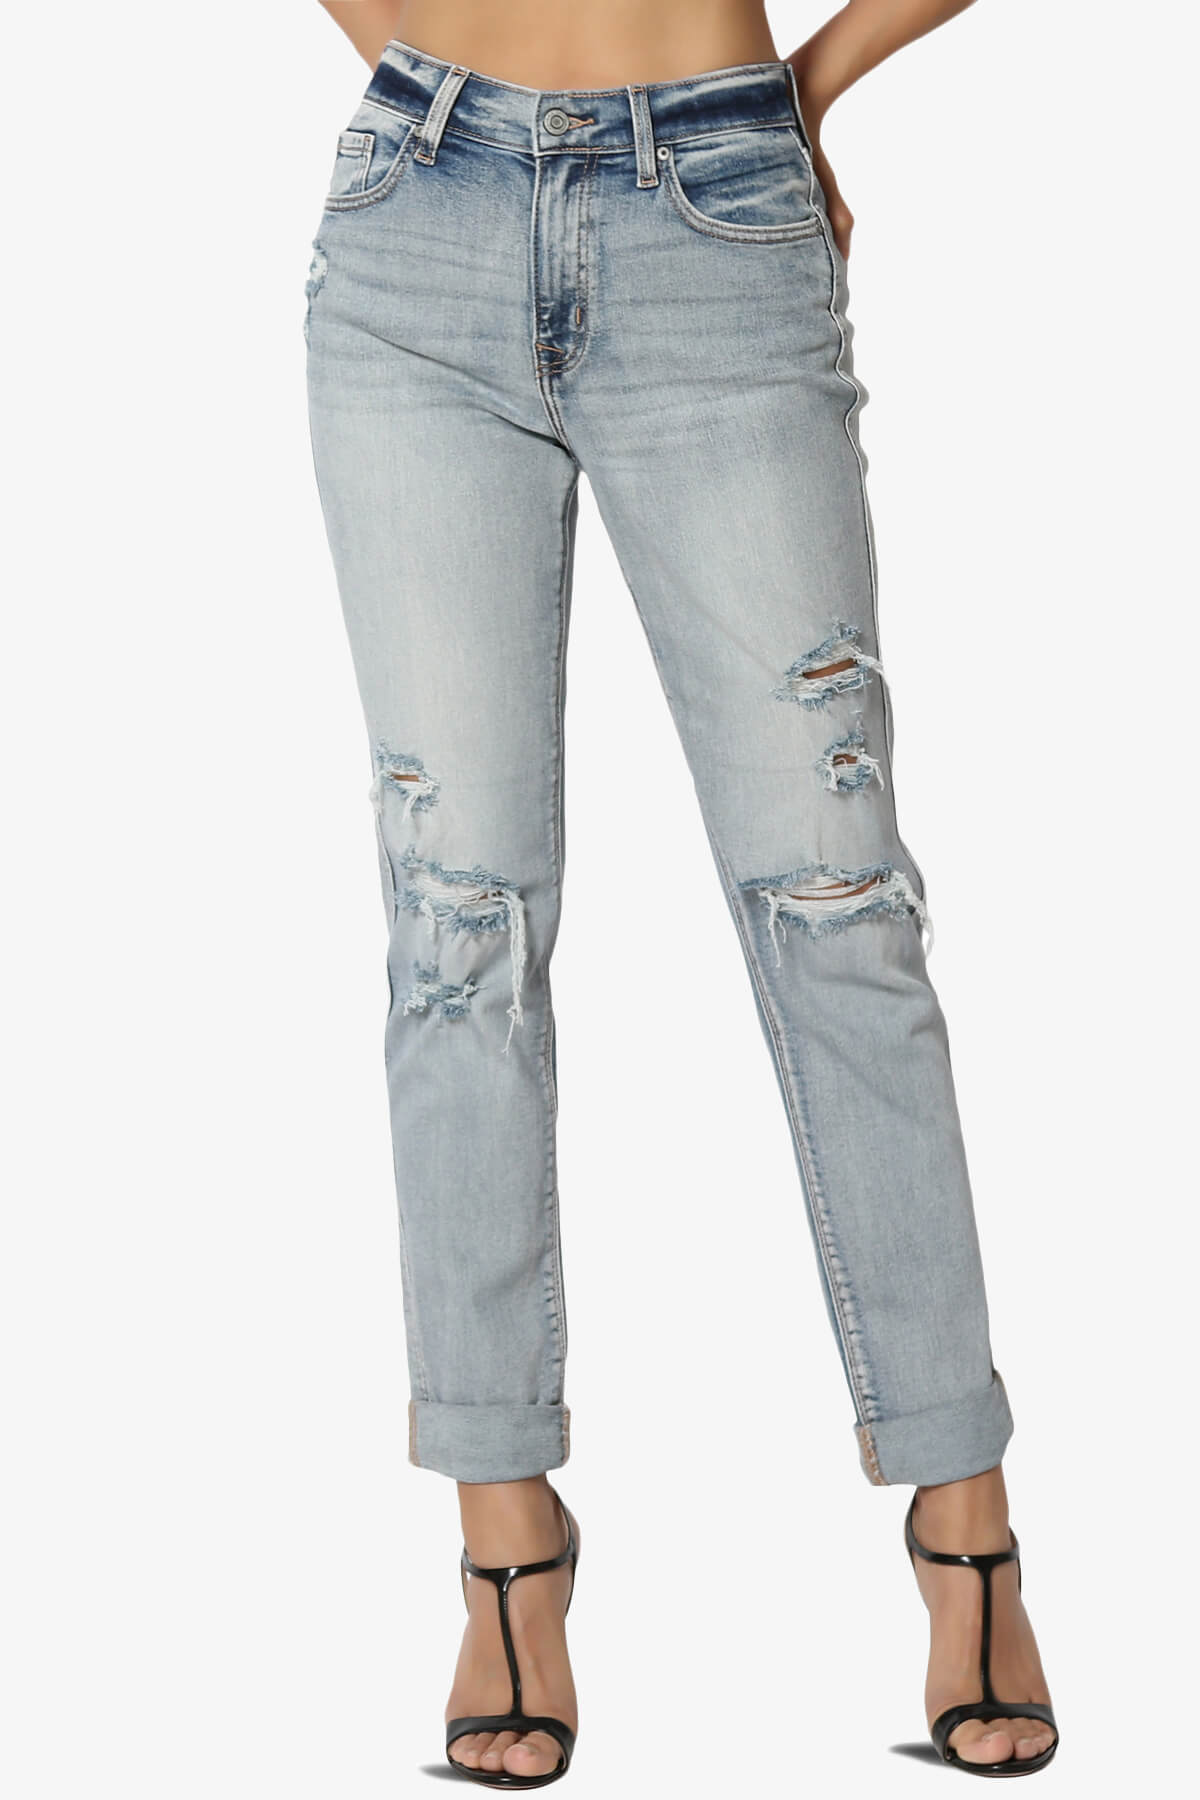 Load image into Gallery viewer, Rocky High Rise Distressed Boyfriend Jeans Supernova LIGHT_1
